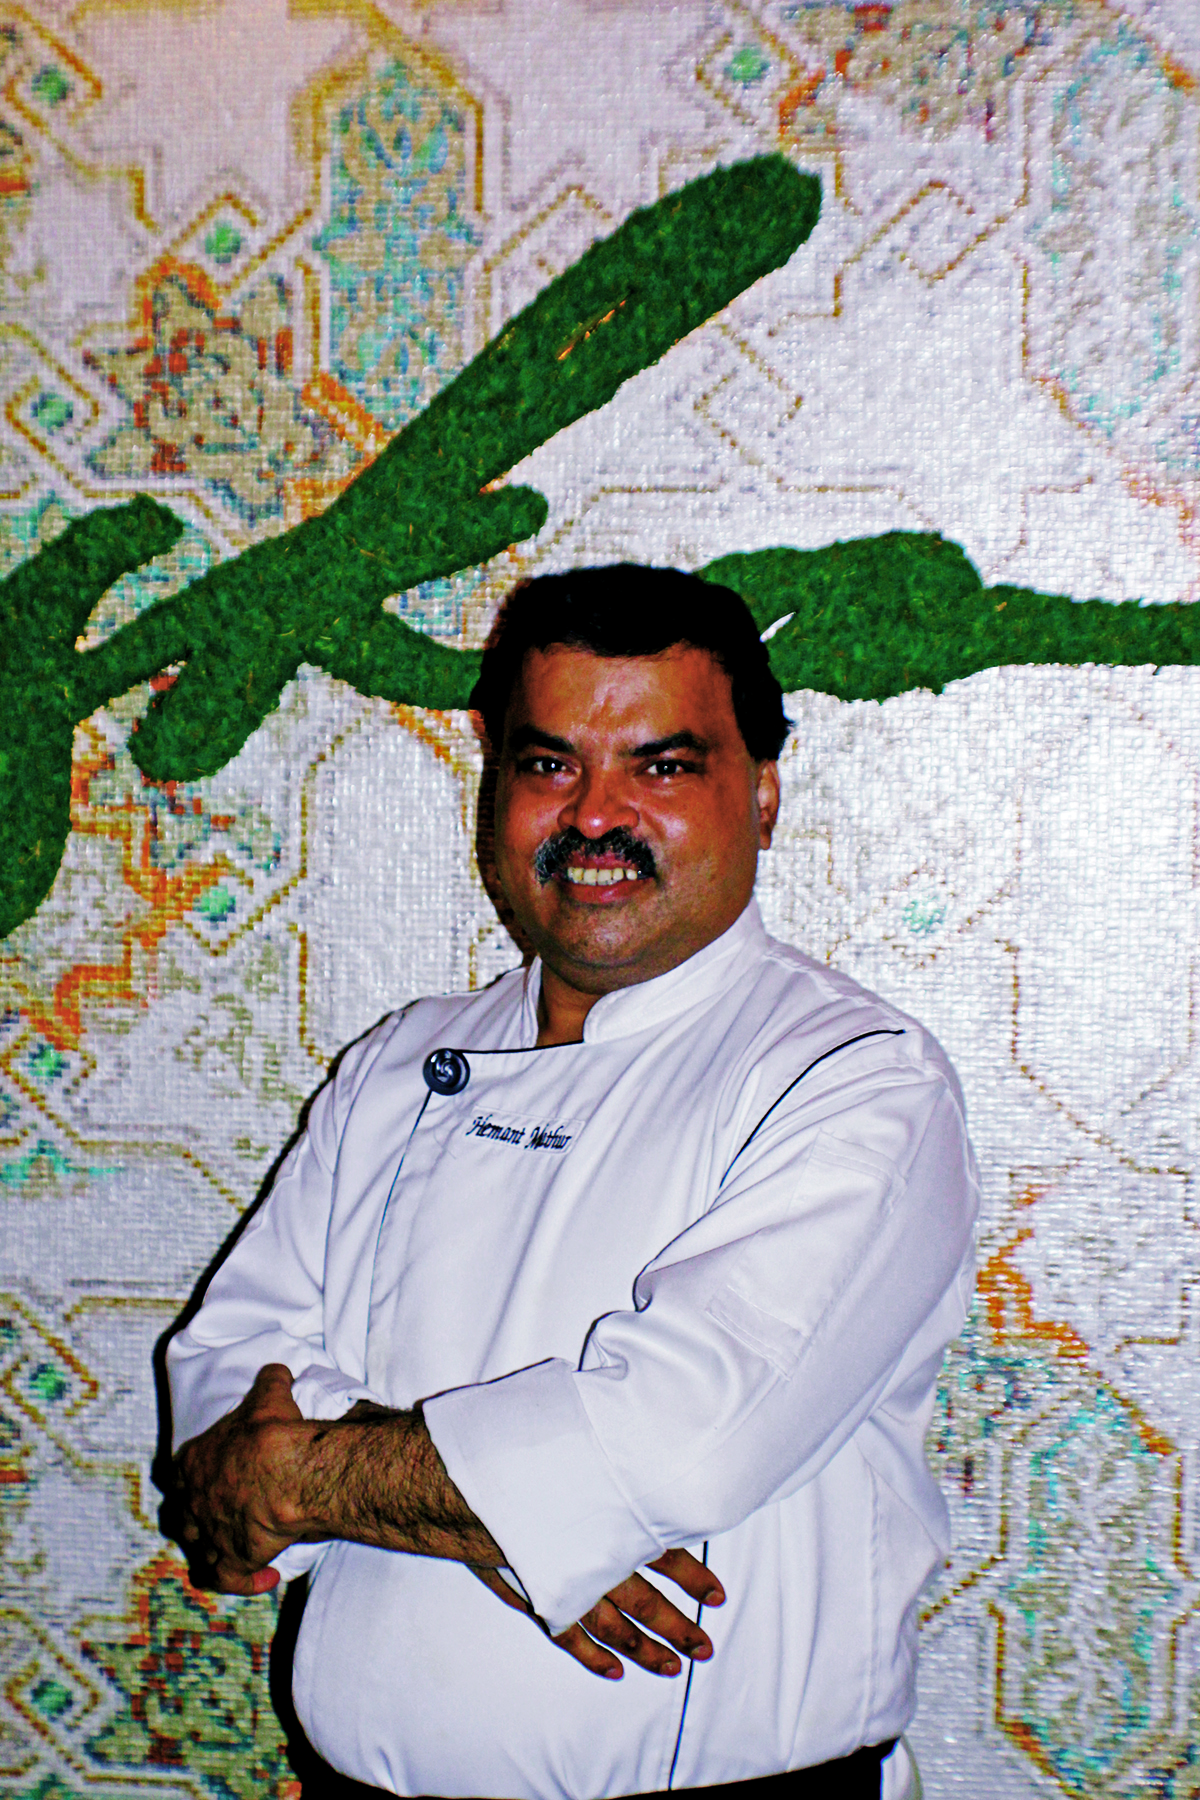 Award winning chef Hemant Mathur is leading the kitchen at Maska, Rickshaw Hospitality Group’s new restaurant in Midtown. In 2004, Mathur opened Devi near New York’s Union Square, which, became the country’s first Michelin-starred Indian restaurant. In 2010, he opened Tulsi, on Manhattan’s east side, which also received a Michelin star. Mathur is known for his skill with the Indian clay oven, and the restaurant is offering traditional and progressive Indian cuisine.